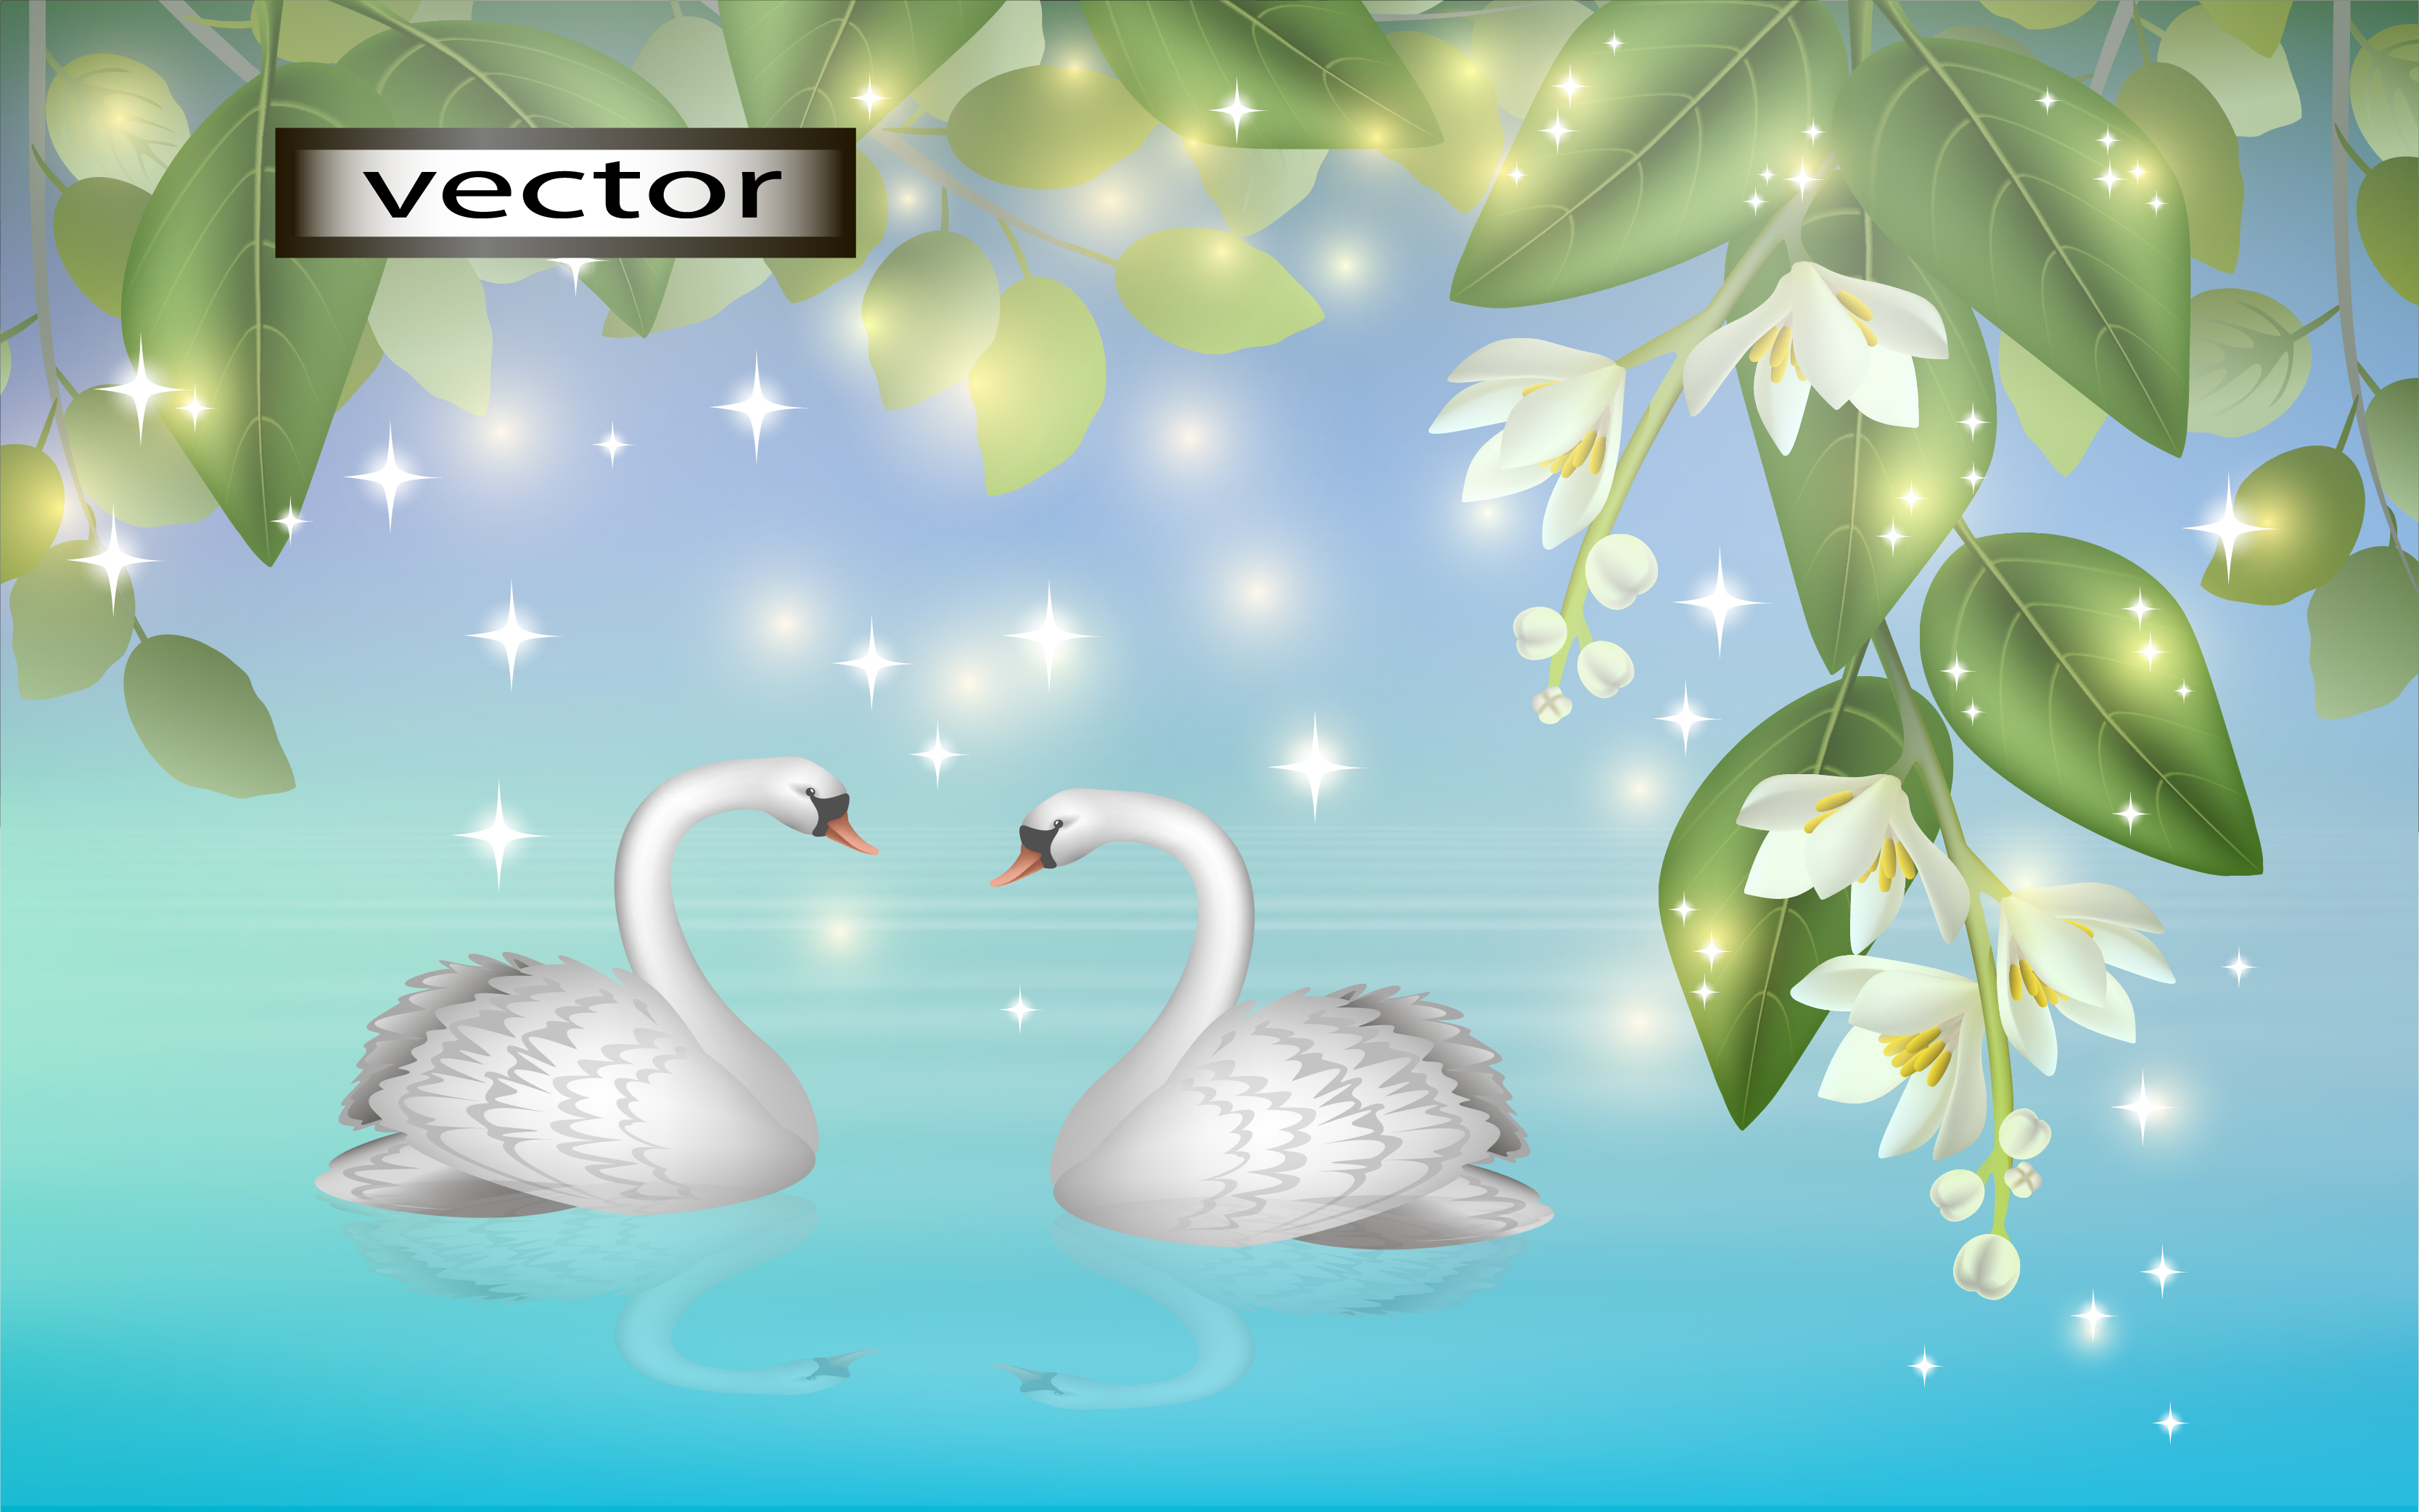 Vector illustration of swans on the background of nature  the flowers hanging over the water  the trees bloom in spring landscape in quiet tones of color